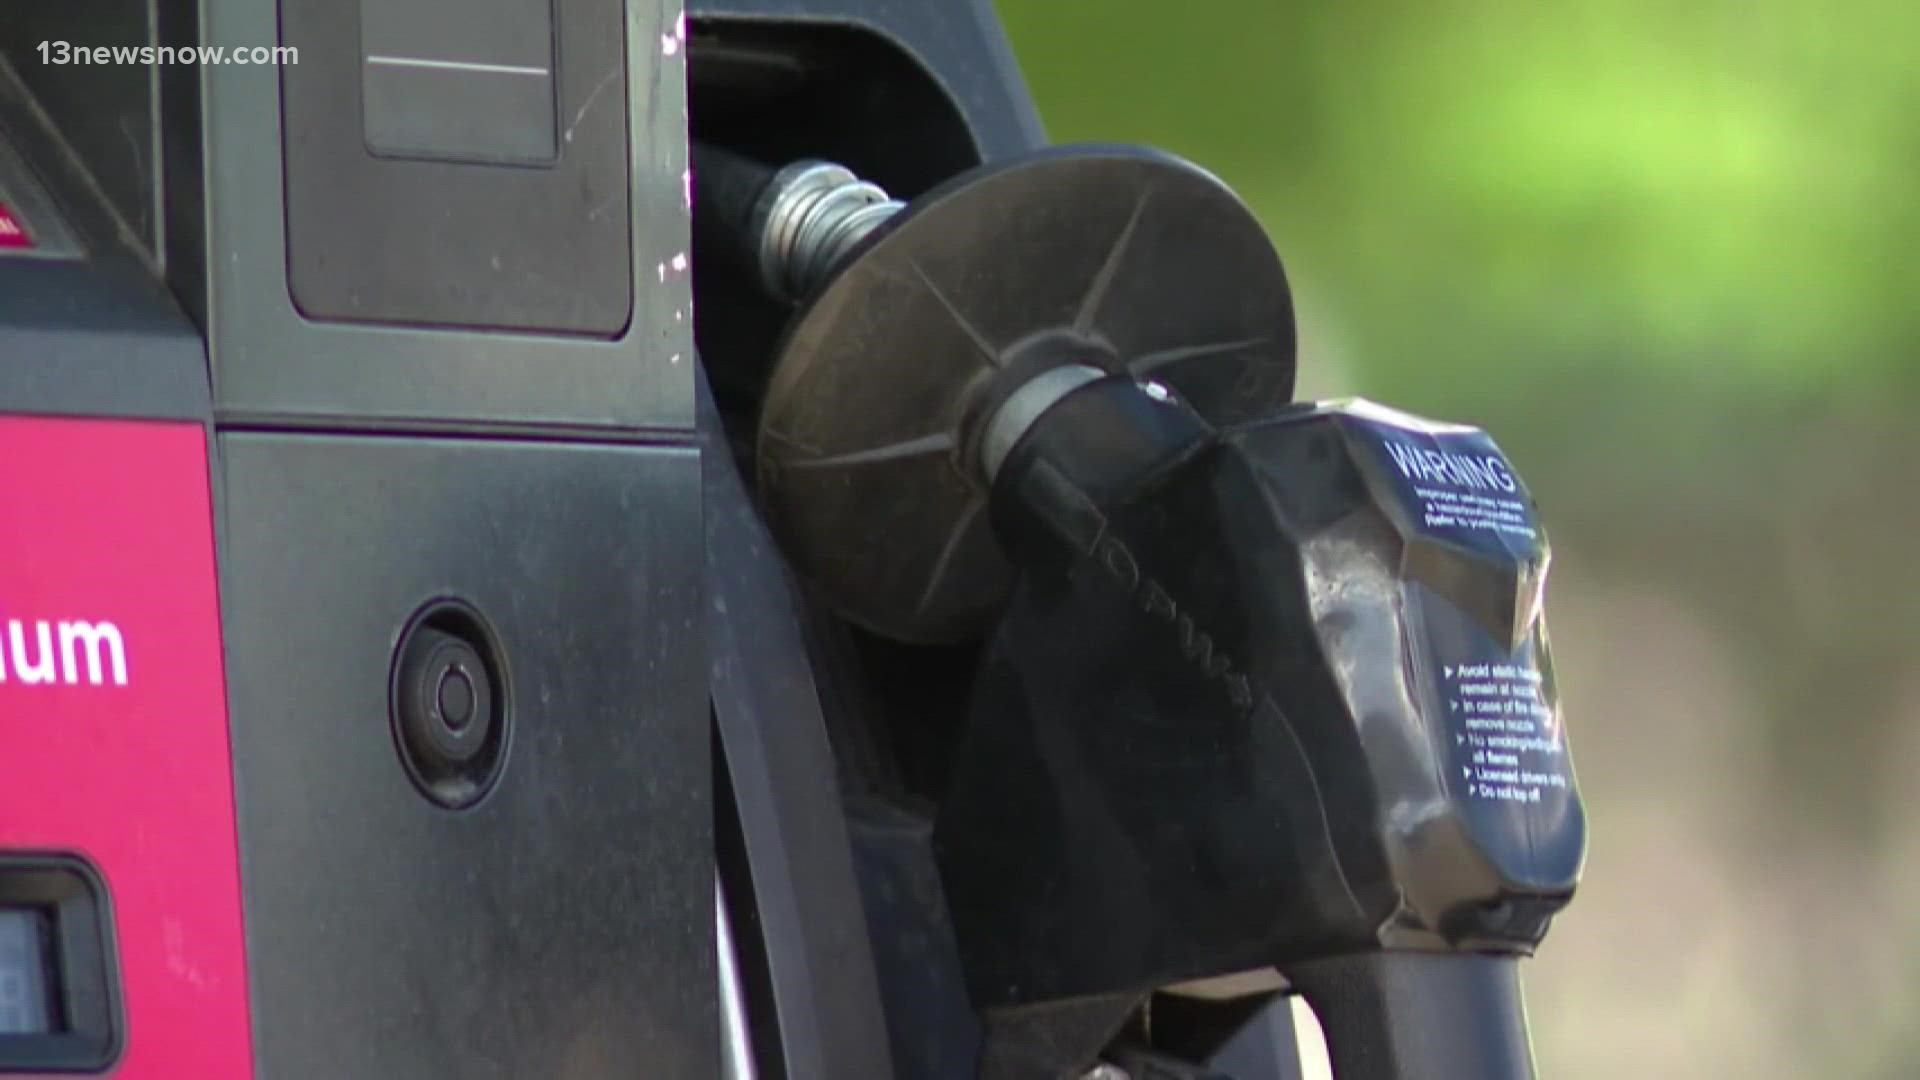 On March 11, an average gallon of gas in Hampton Roads cost about $4.27. Three days later, that was down to $4.21.